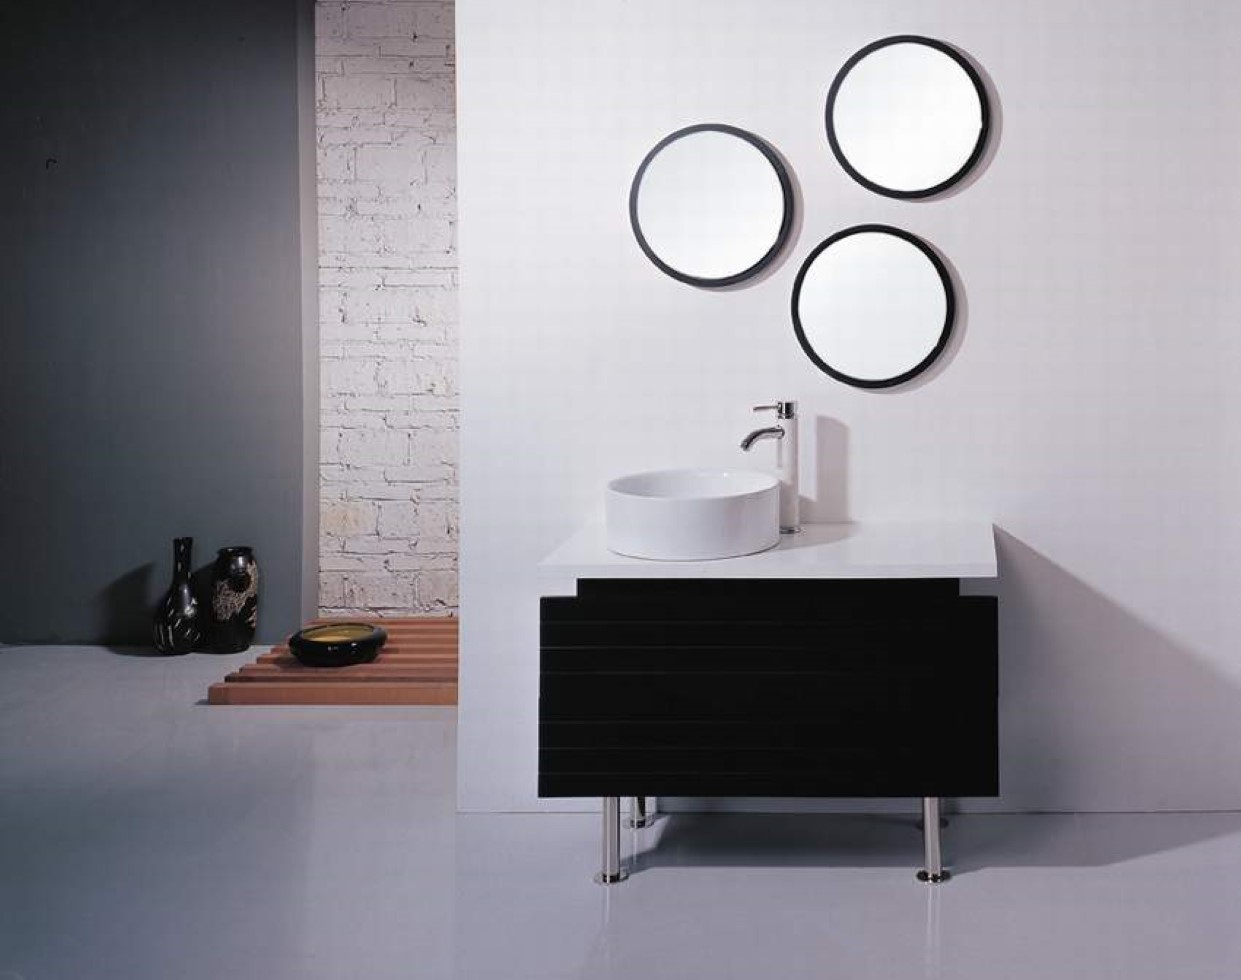 Wall Mirrors Black Round Wall Mirrors Plus Modern Black Bathroom Cabinet Idea And Stylish Vessel Sink Feat Vanity Top Faucet Design Bathroom Bathroom Cabinetry For Various Bathroom Design